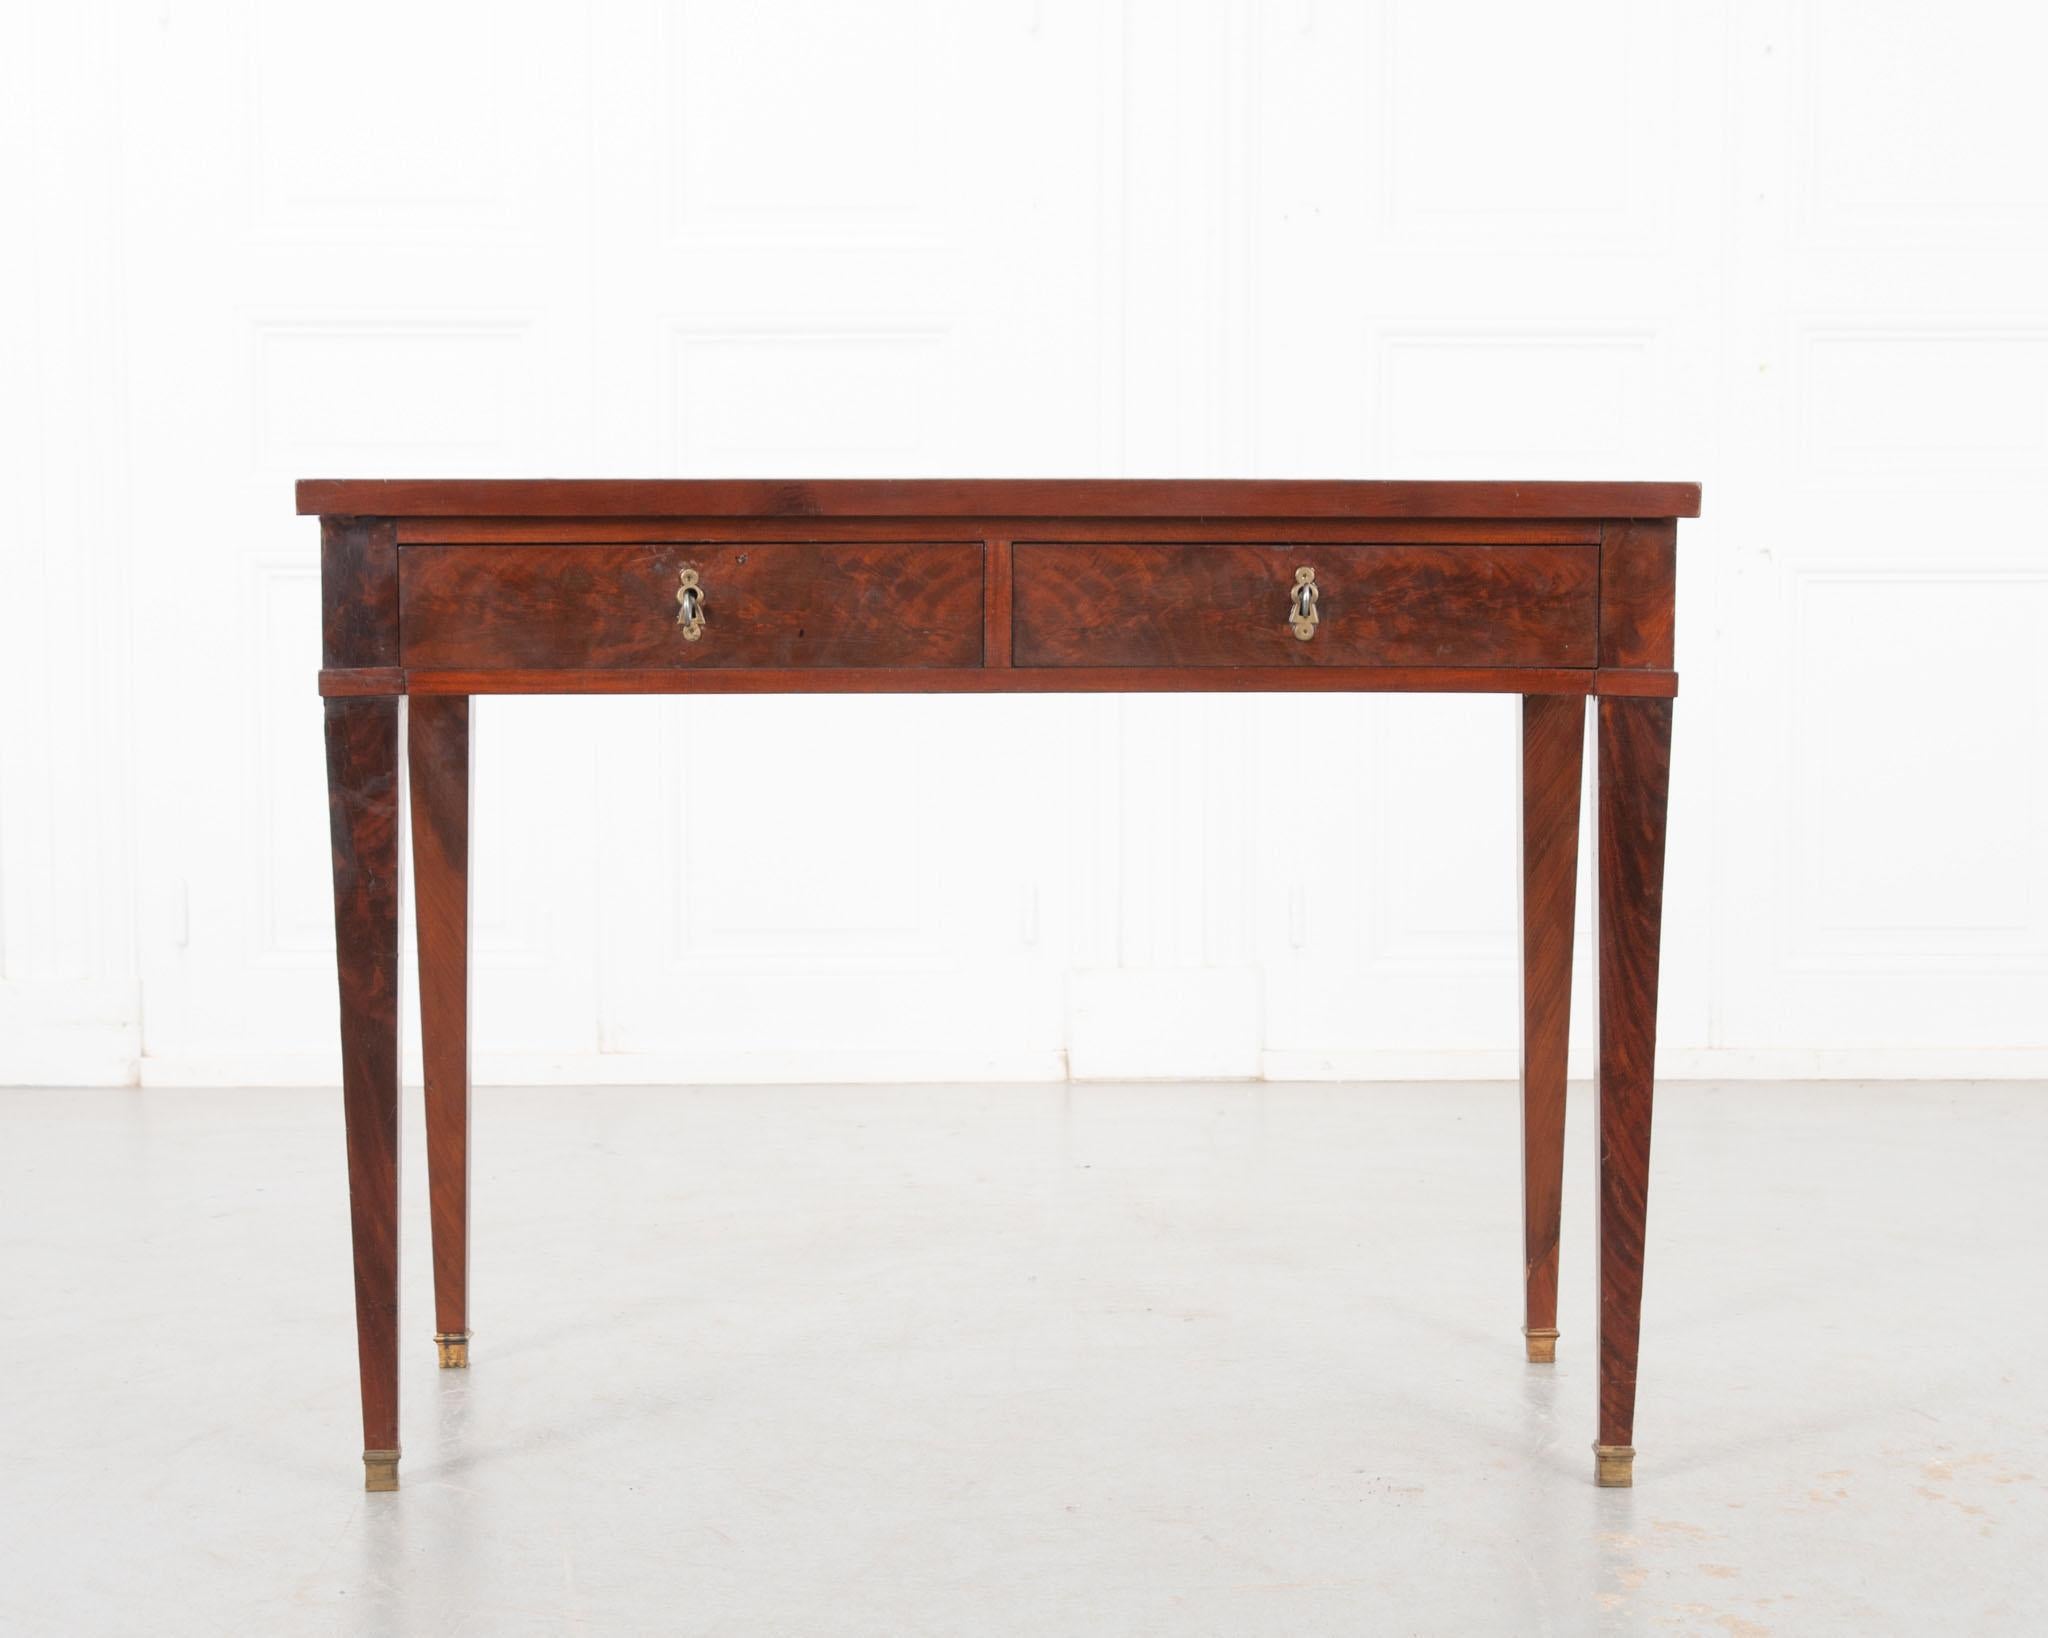 A handsome Directoire style writing desk crafted in France, circa 1820. Well worn hazelnut toned shagreen creates a cozy, welcoming place to work. A wonderful patina envelopes the distinctive mahogany veneer body. The apron houses two drink slides